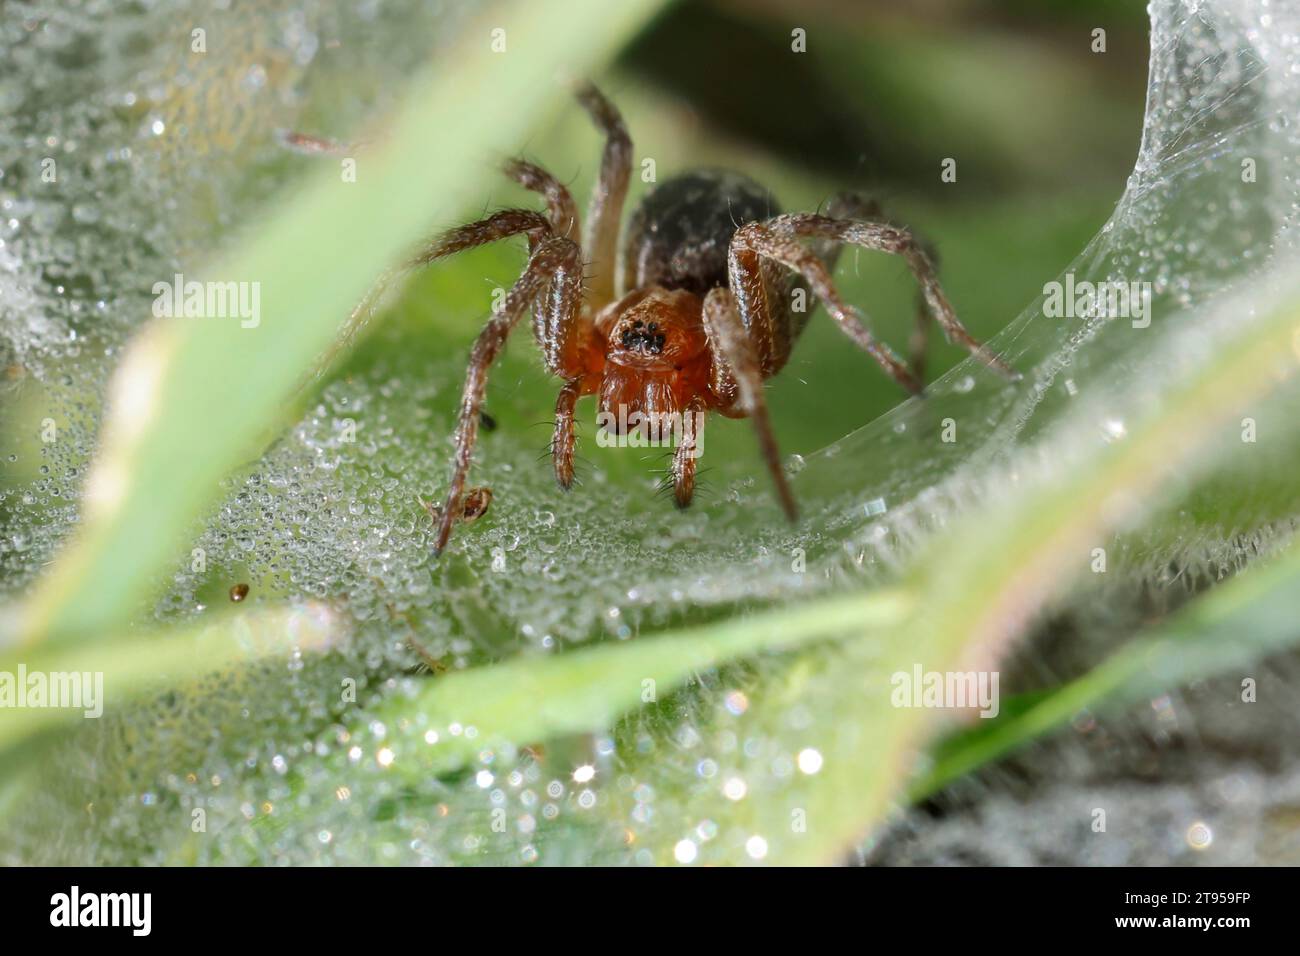 grass funnel-weaver, maze spider (Agelena labyrinthica oder Agelena orientalis), juvenile in web with morning dew drops, Croatia Stock Photo